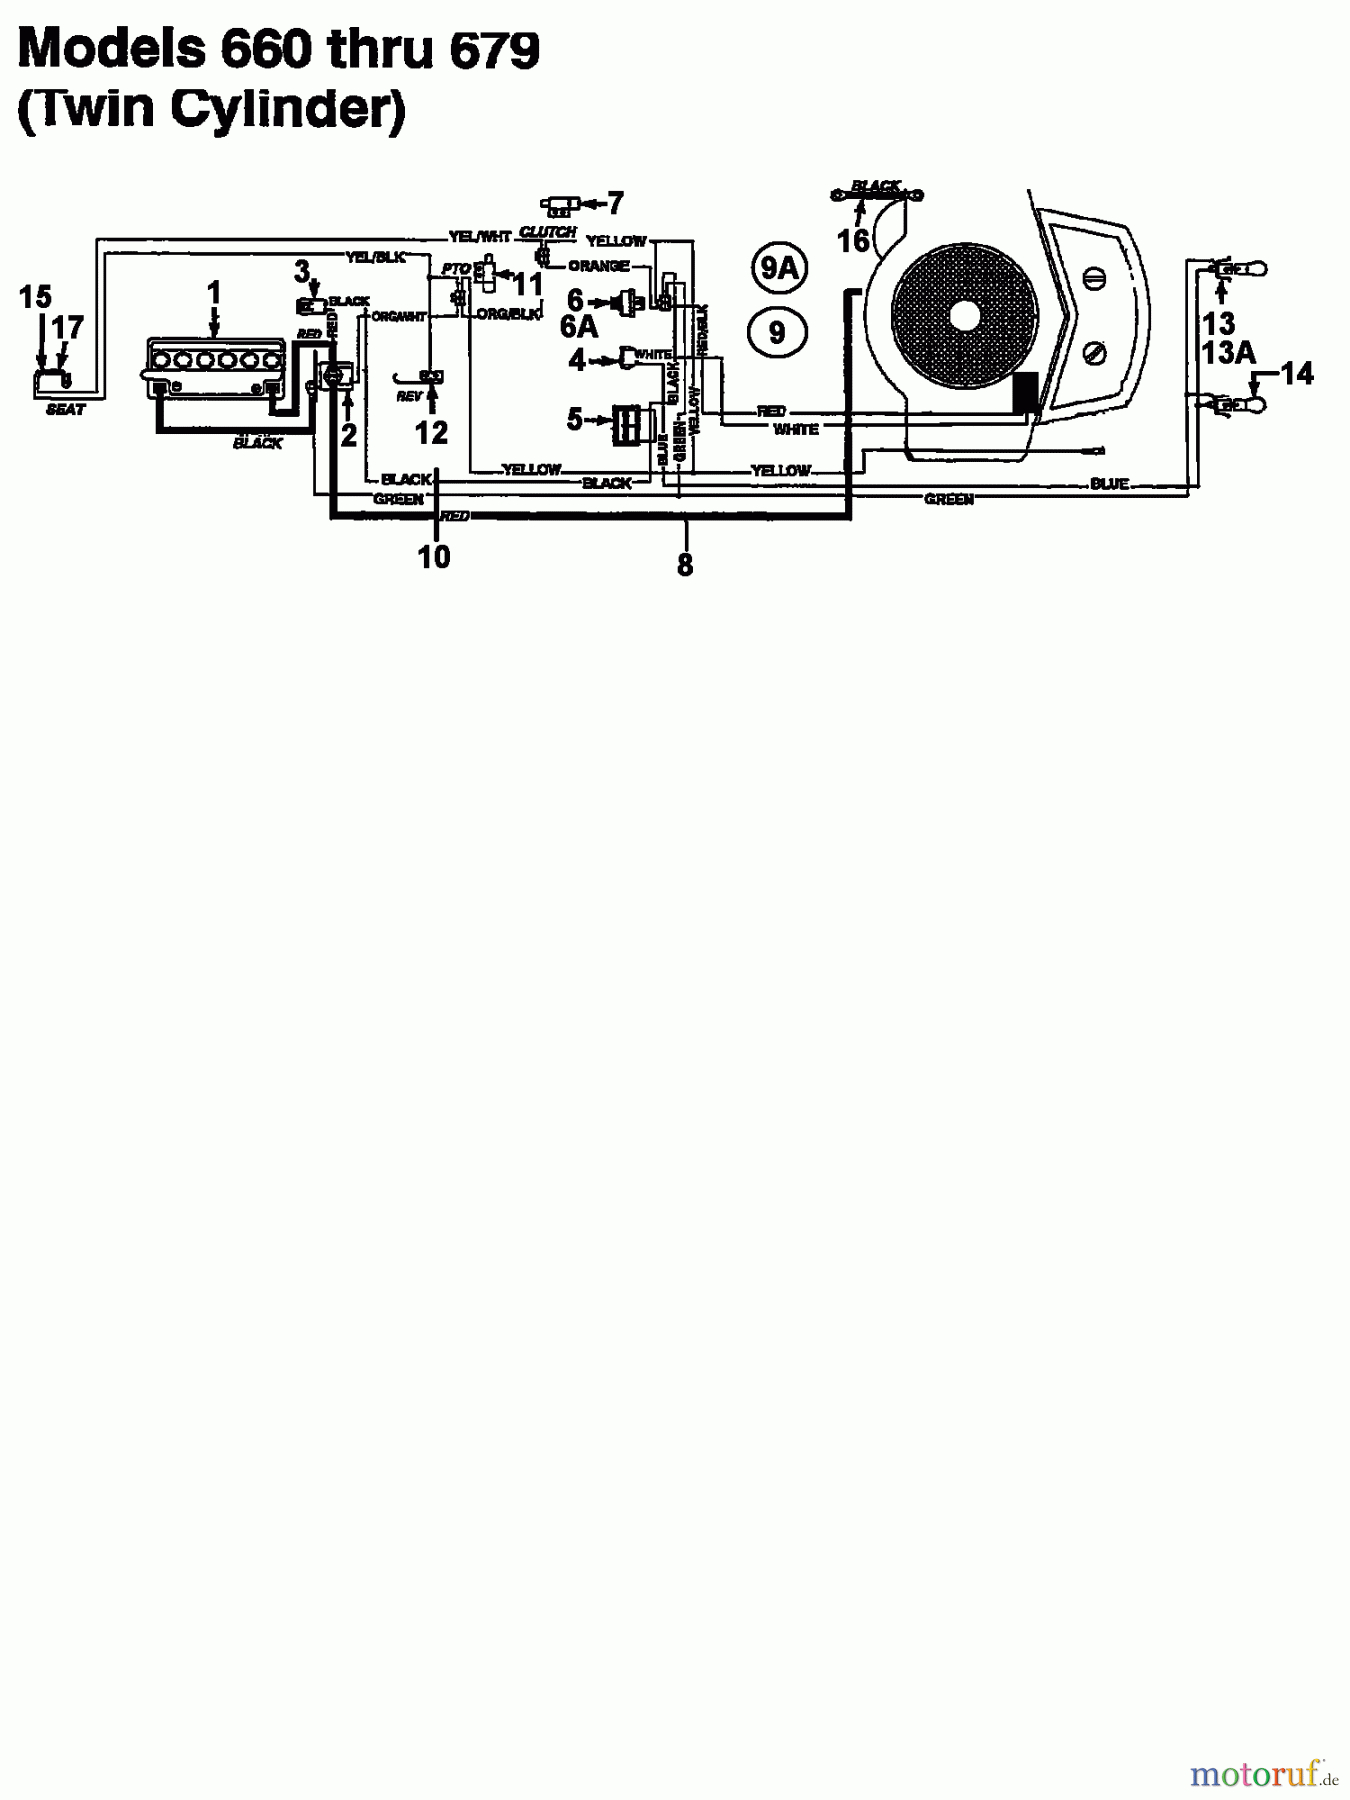  Bauhaus Lawn tractors Funrunner 133I679F646  (1993) Wiring diagram twin cylinder